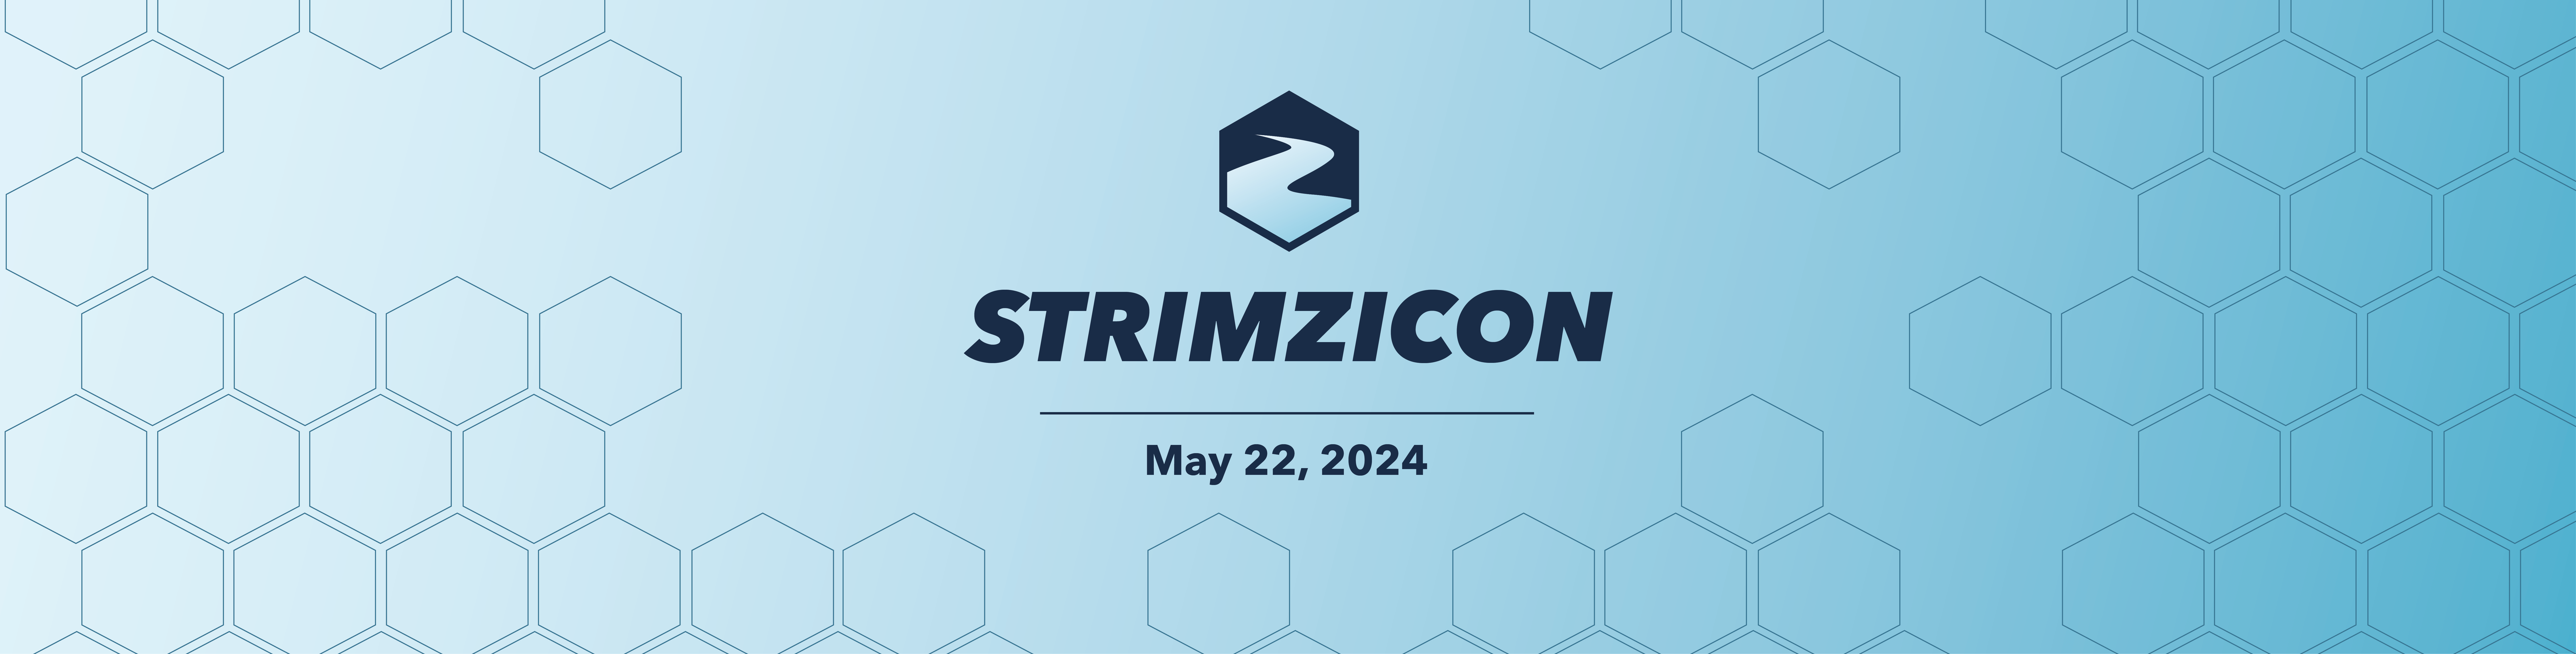 StrimziCon 2024: Learn & Connect with the Strimzi Community